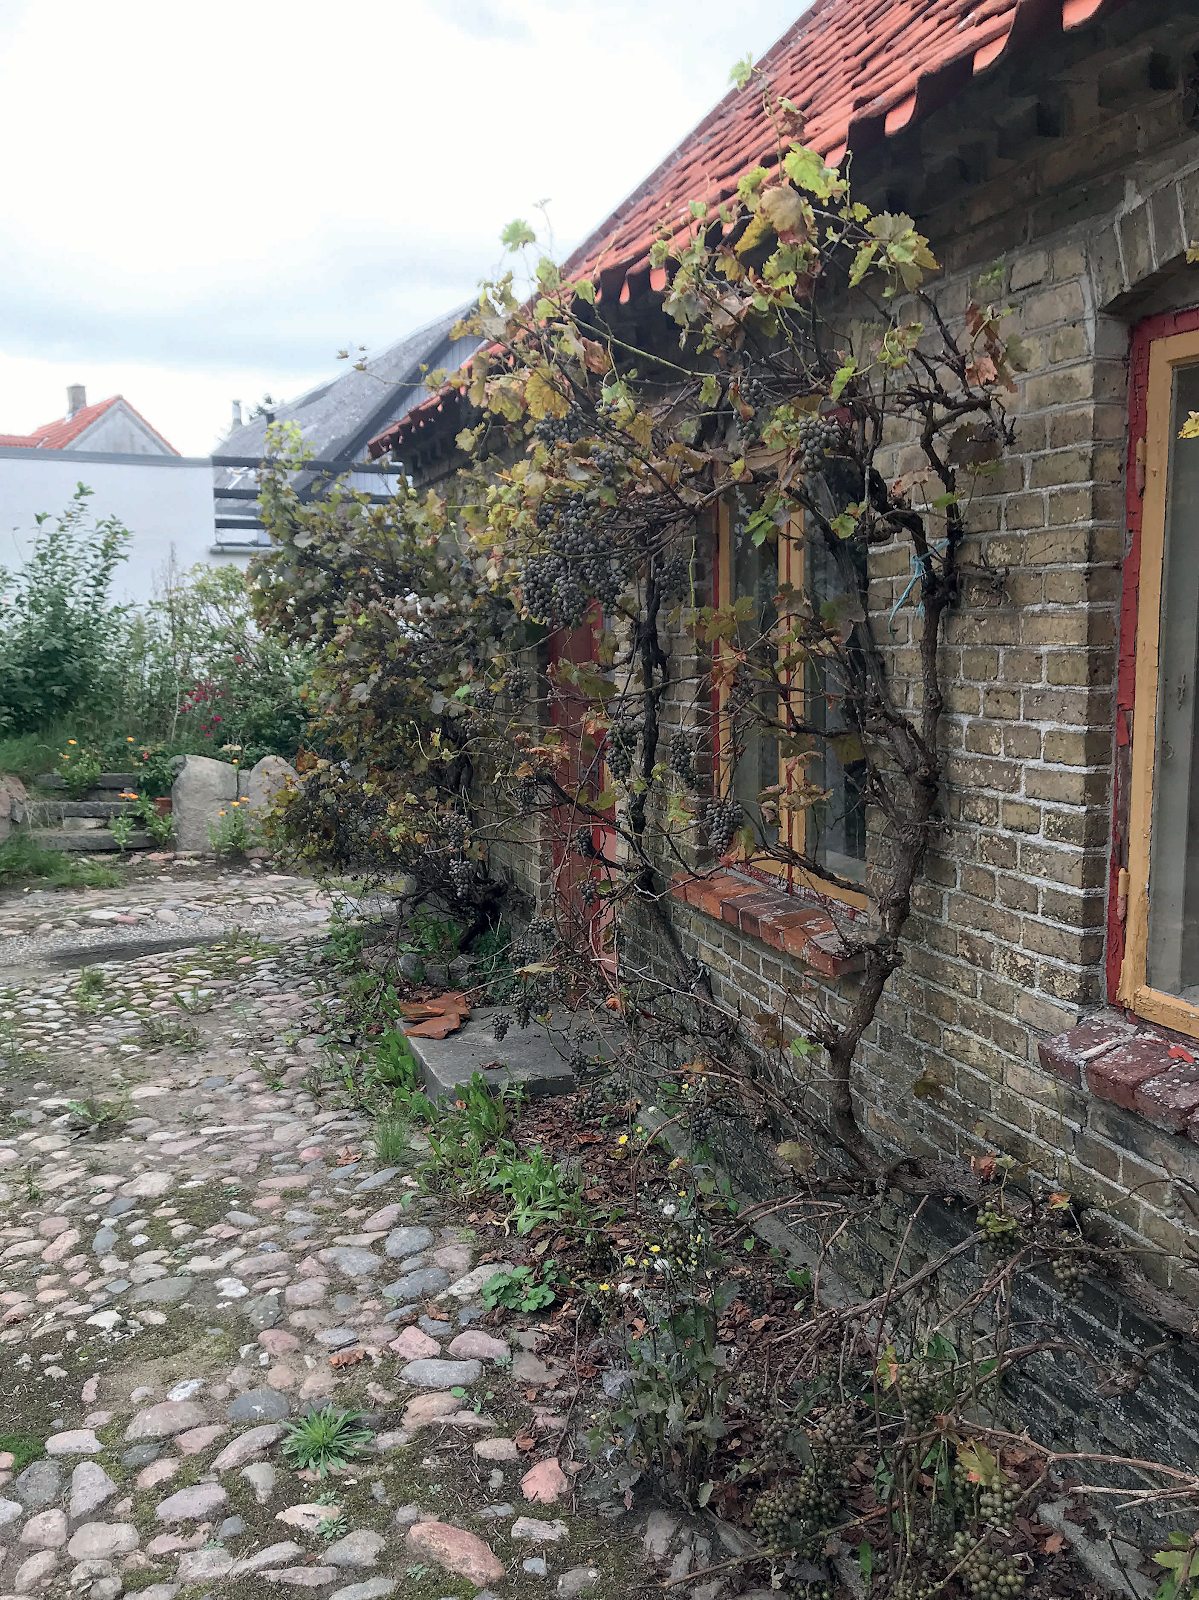 Danish Seed Savers visit old garden to look for heritage plants in September 2019